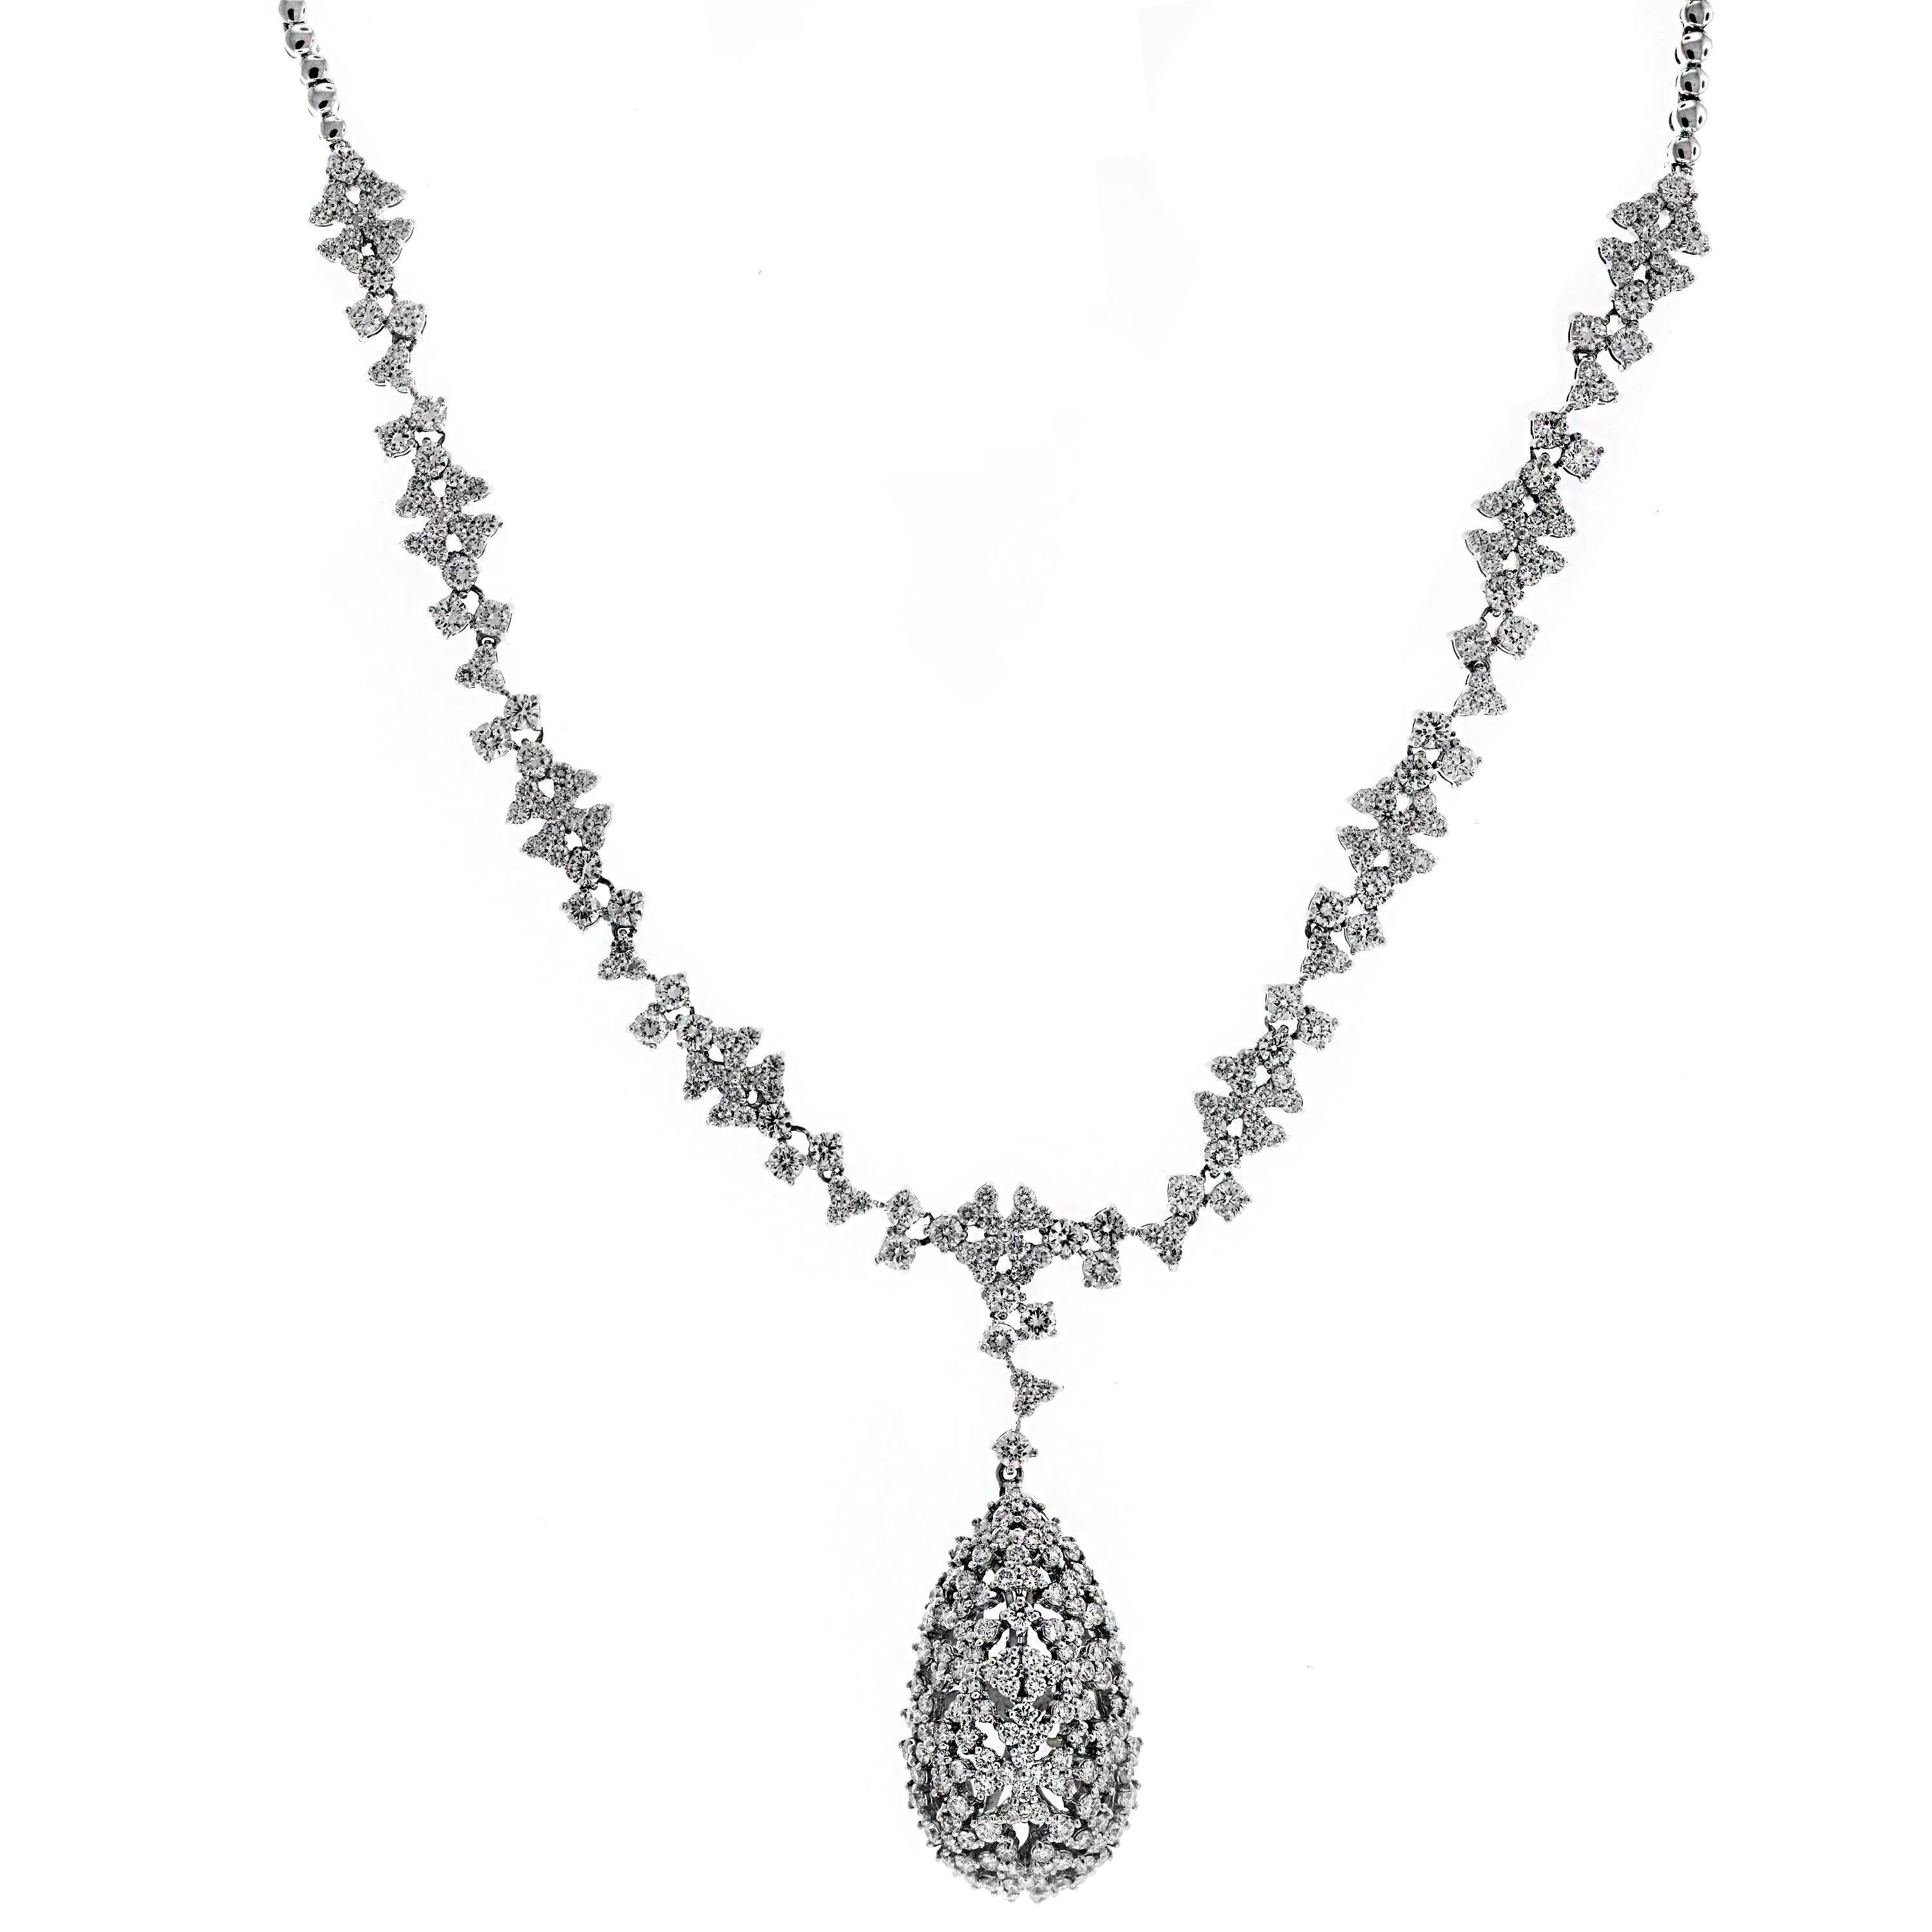 White Gold and Diamond Necklace with Pear Shape Pendant Drop